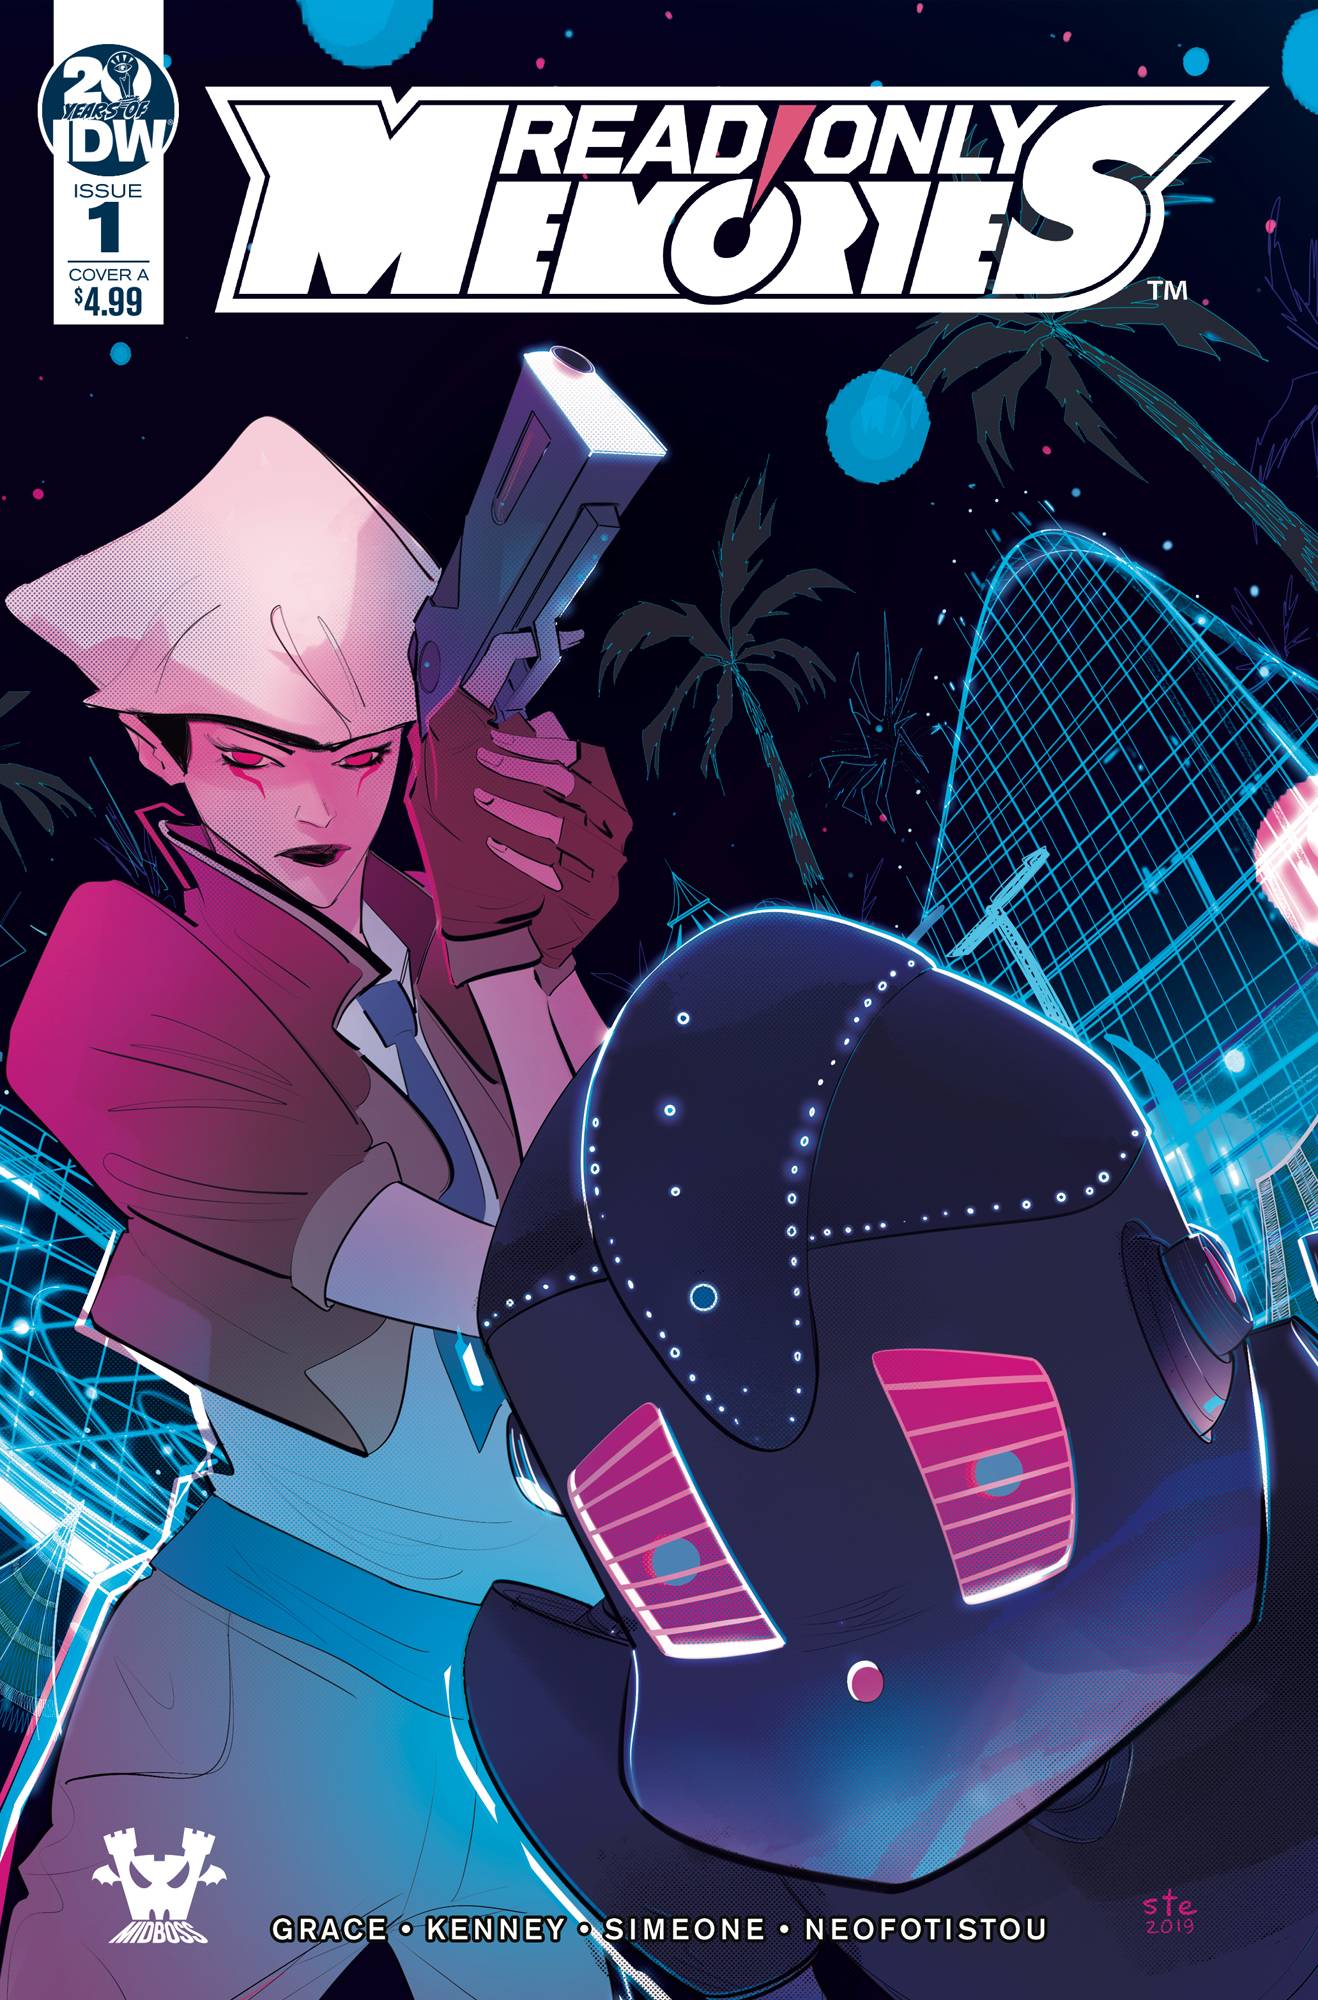 Read Only Memories #1 Cover A Simeone